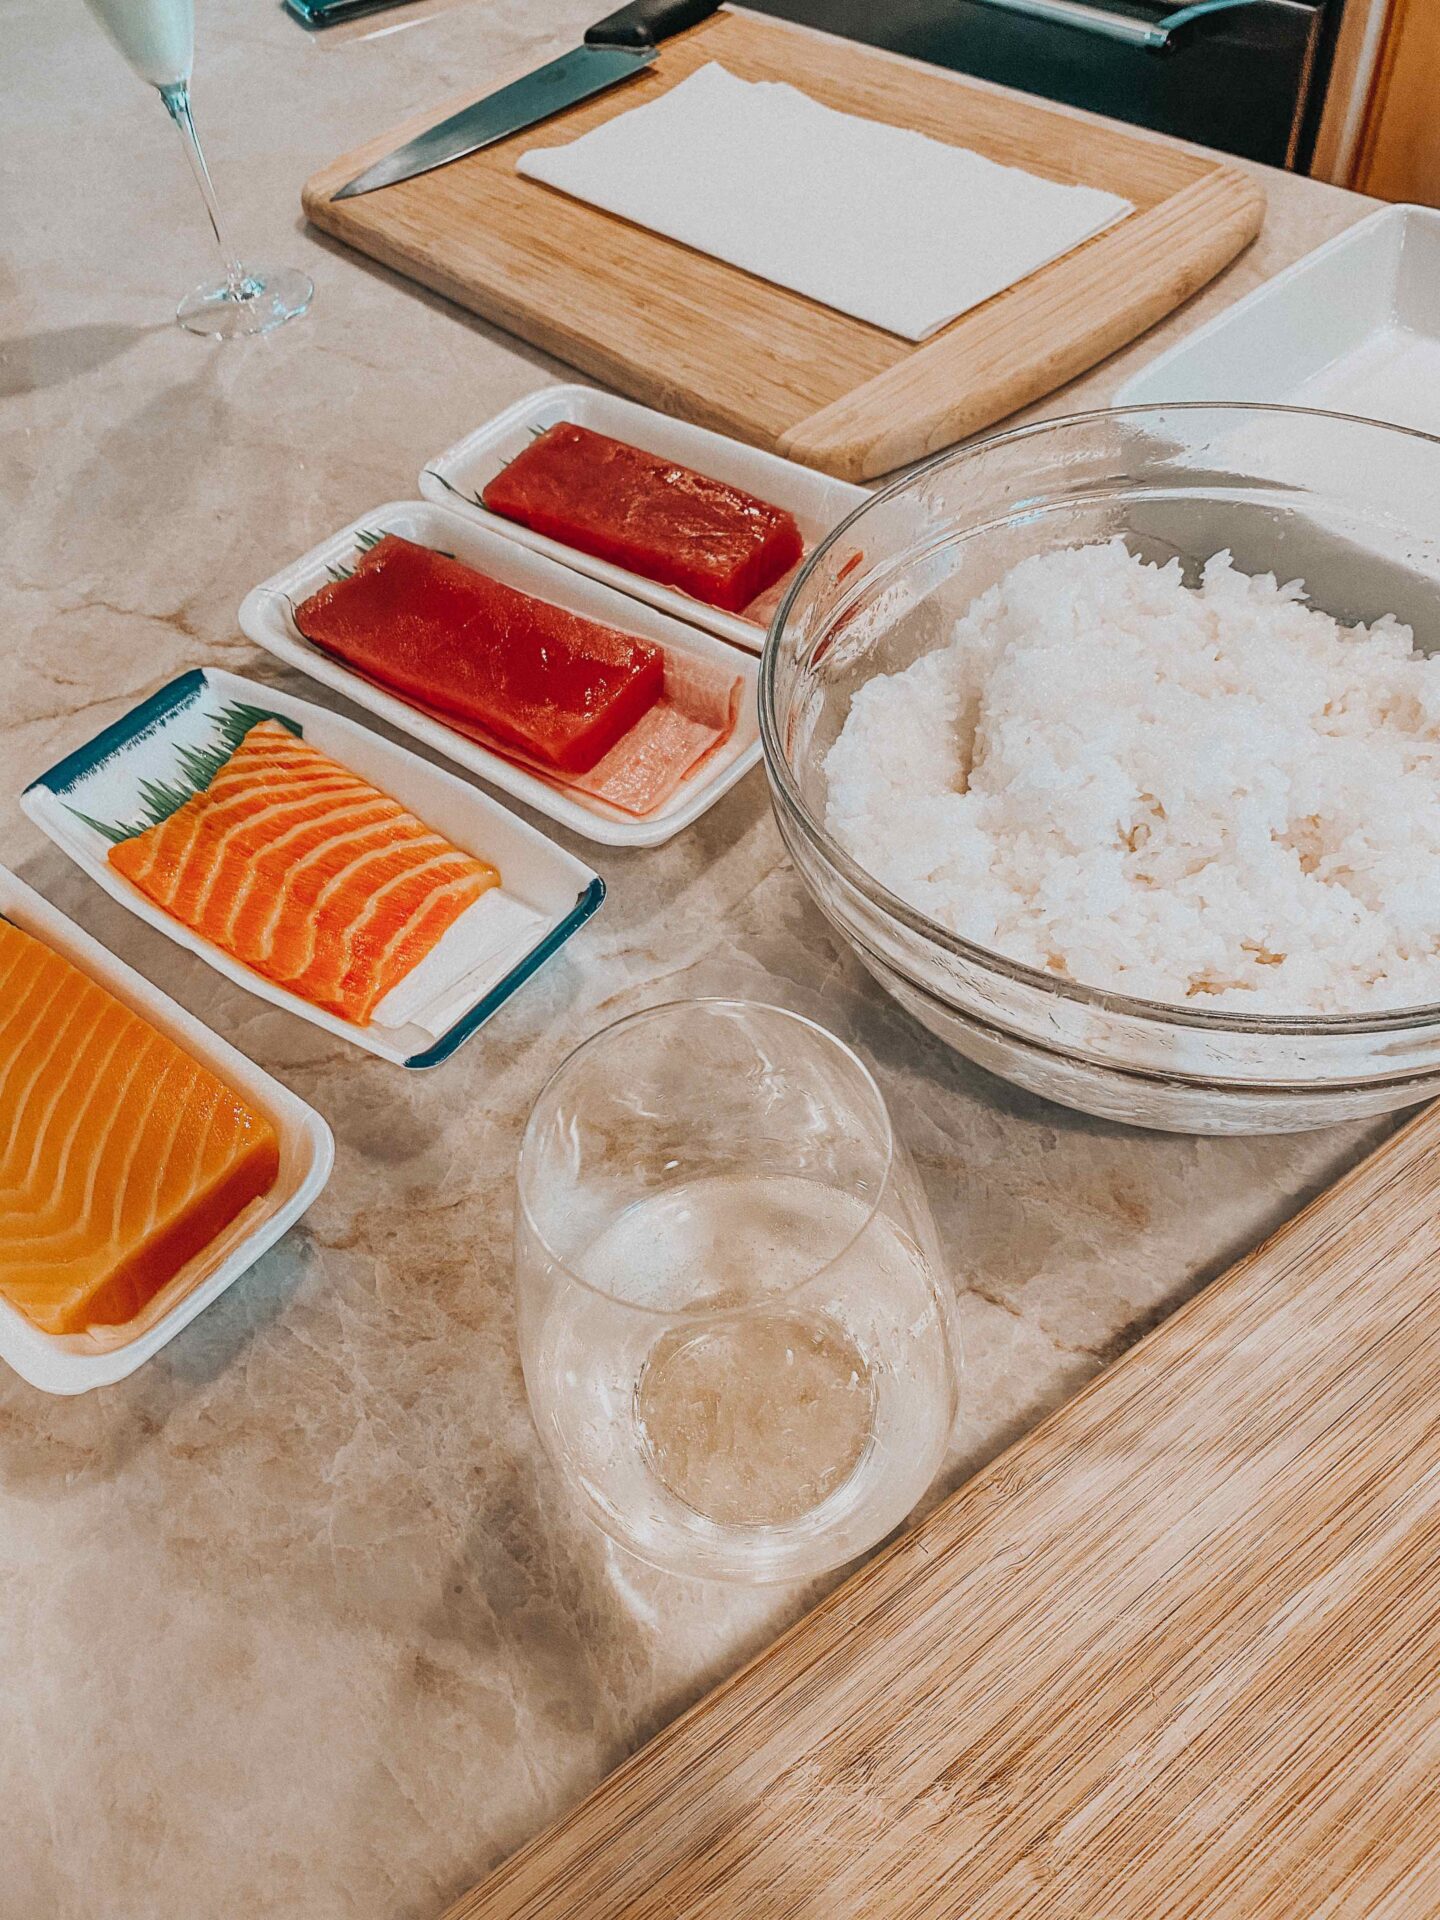 San Diego Valentine's Day date idea - homemade sushi cooking date night